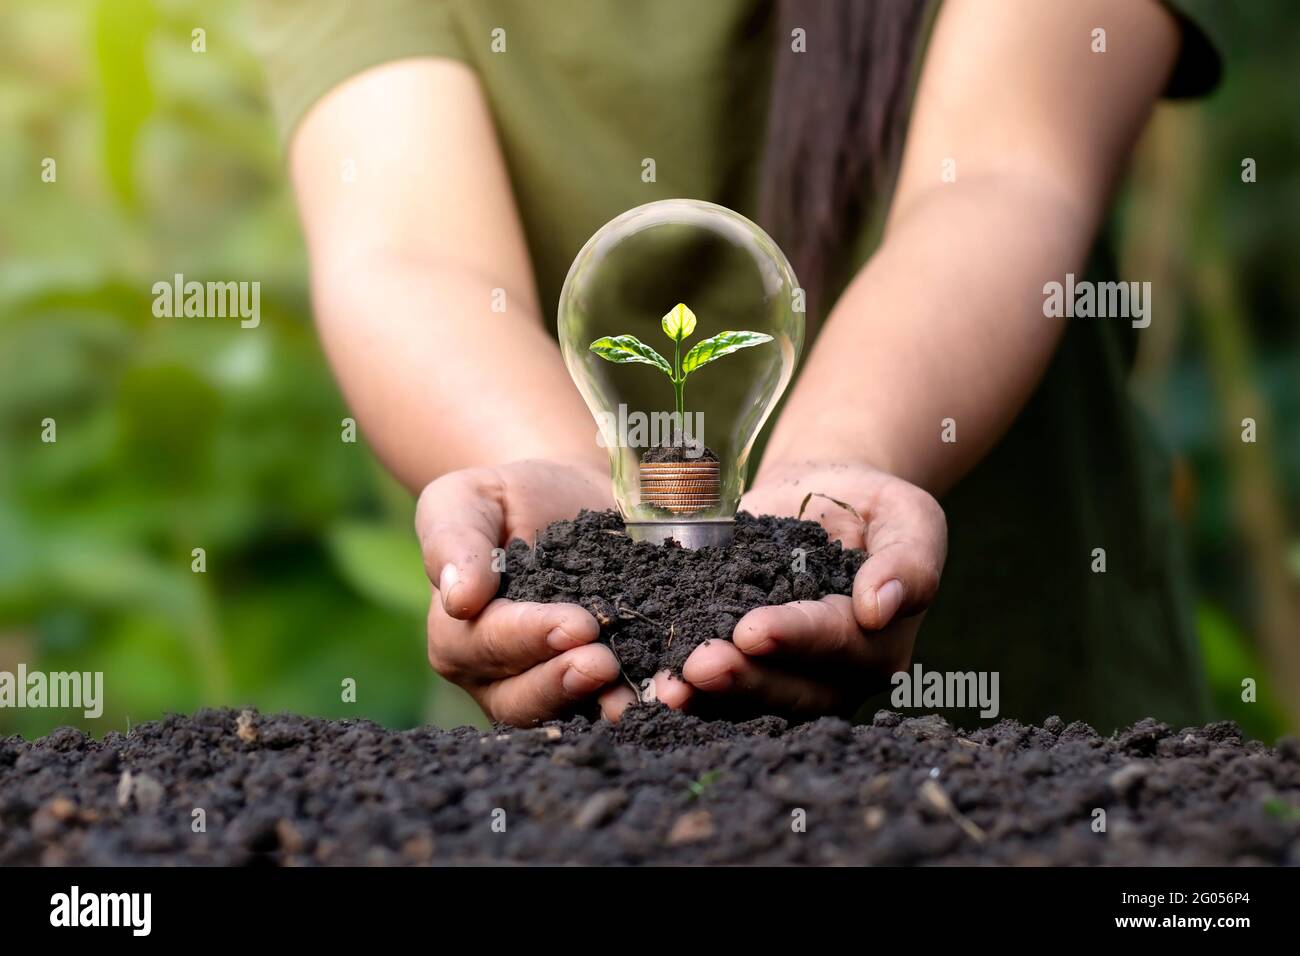 A small tree growing on a silver coin and energy-saving light bulbs, an energy-saving concept and an environmentally friendly clean energy. Stock Photo